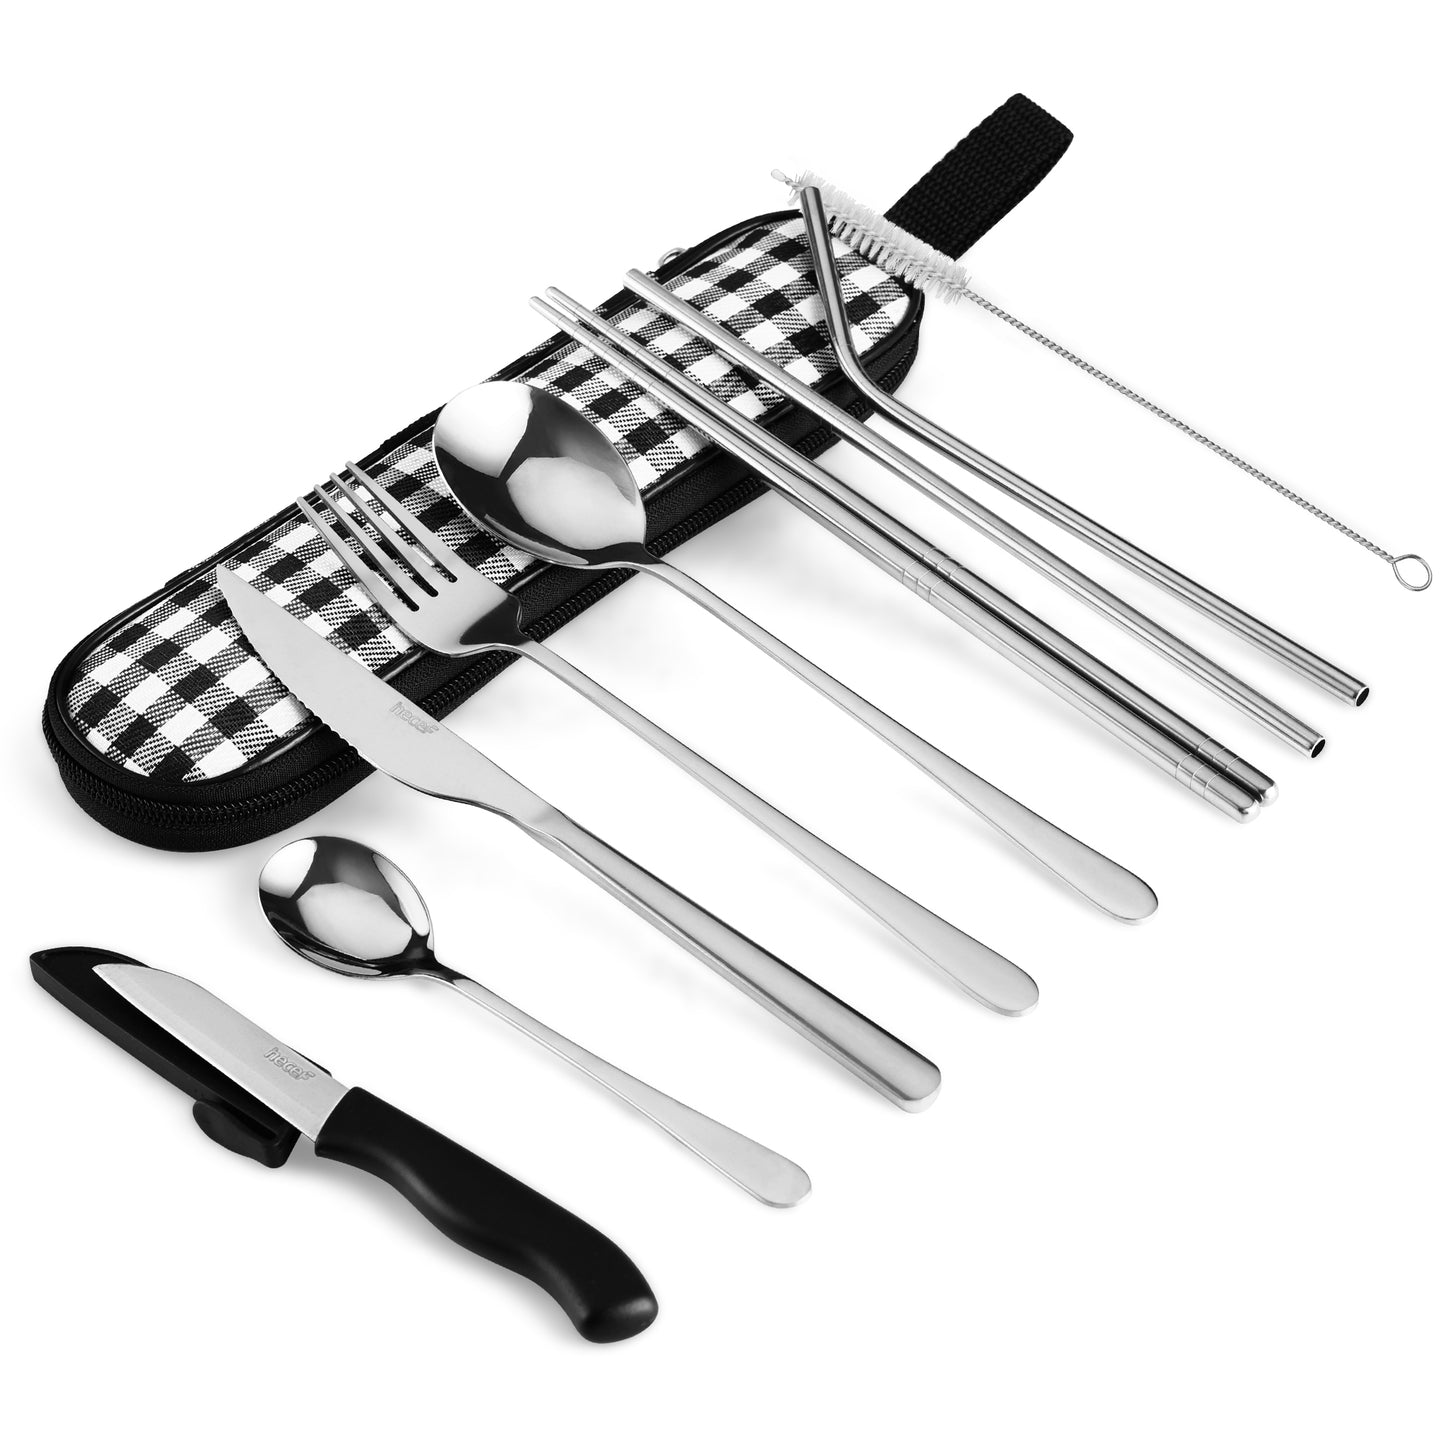 Travel Utensils Set 6 Piece Ceramic Handle Camping Office Lunch